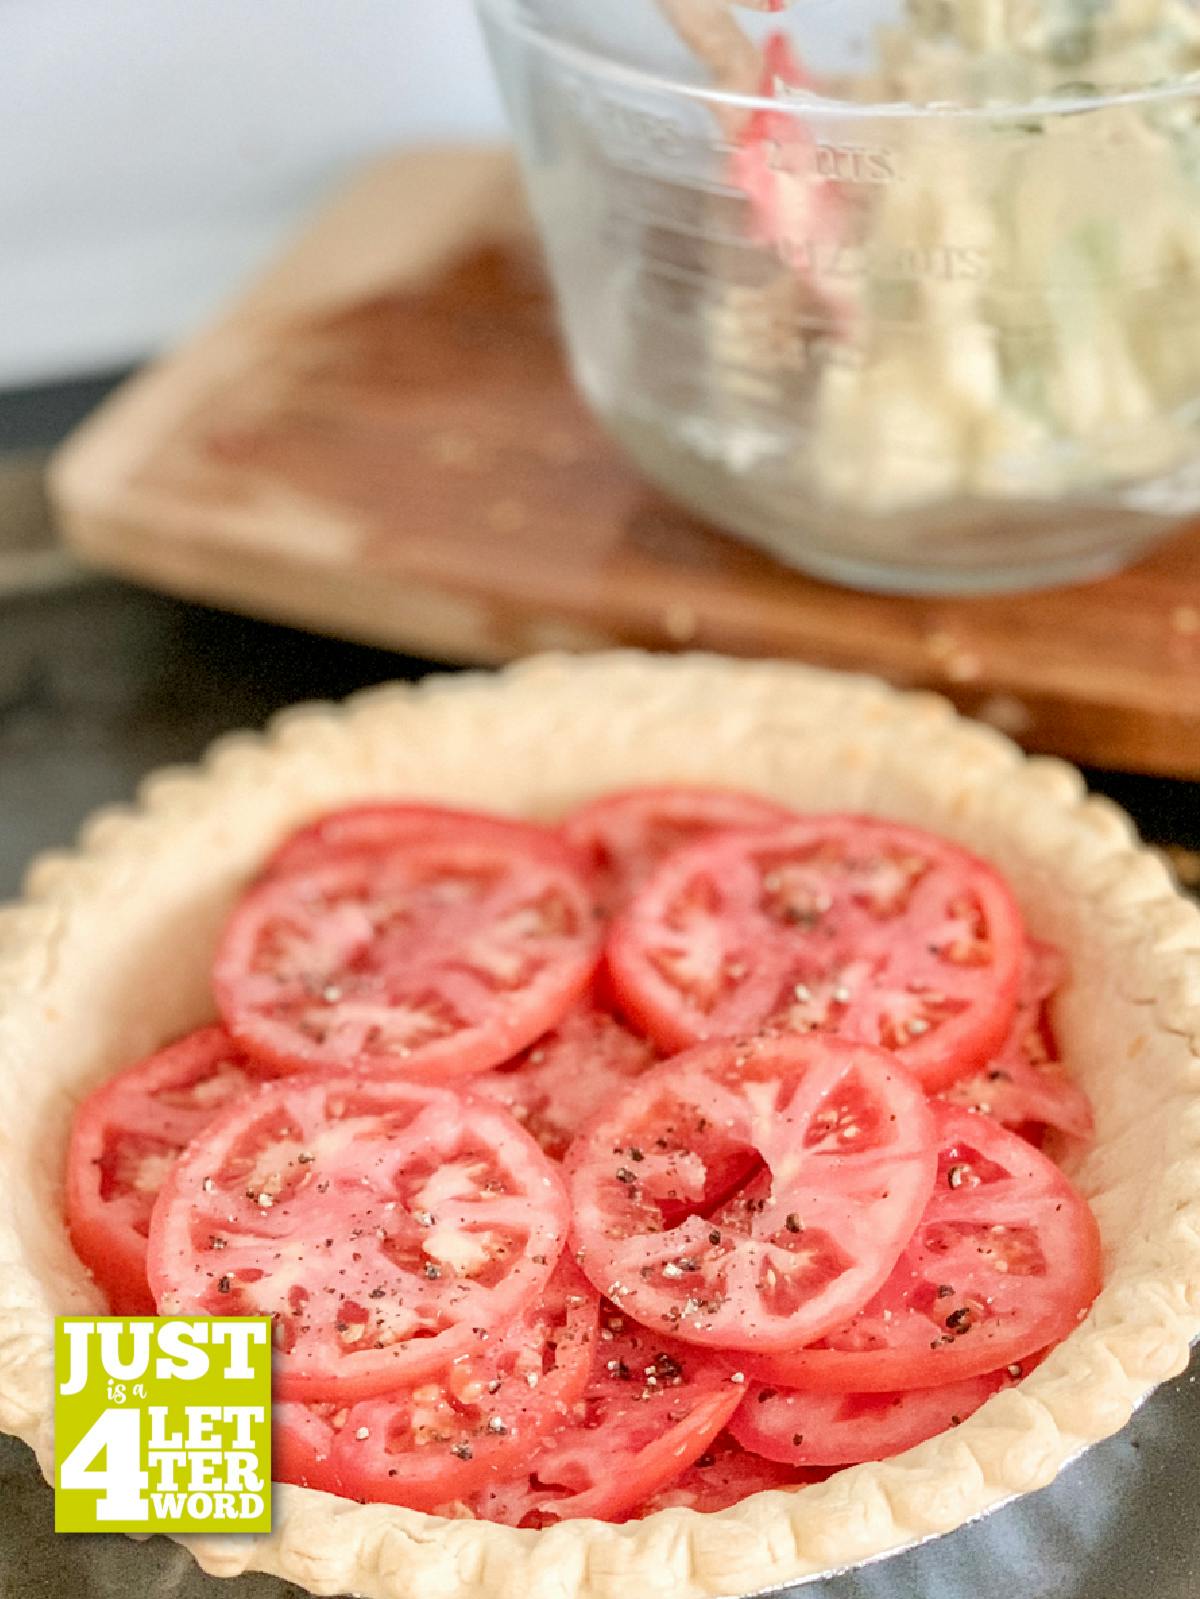 Sliced tomatoes in an unbaked pie crus